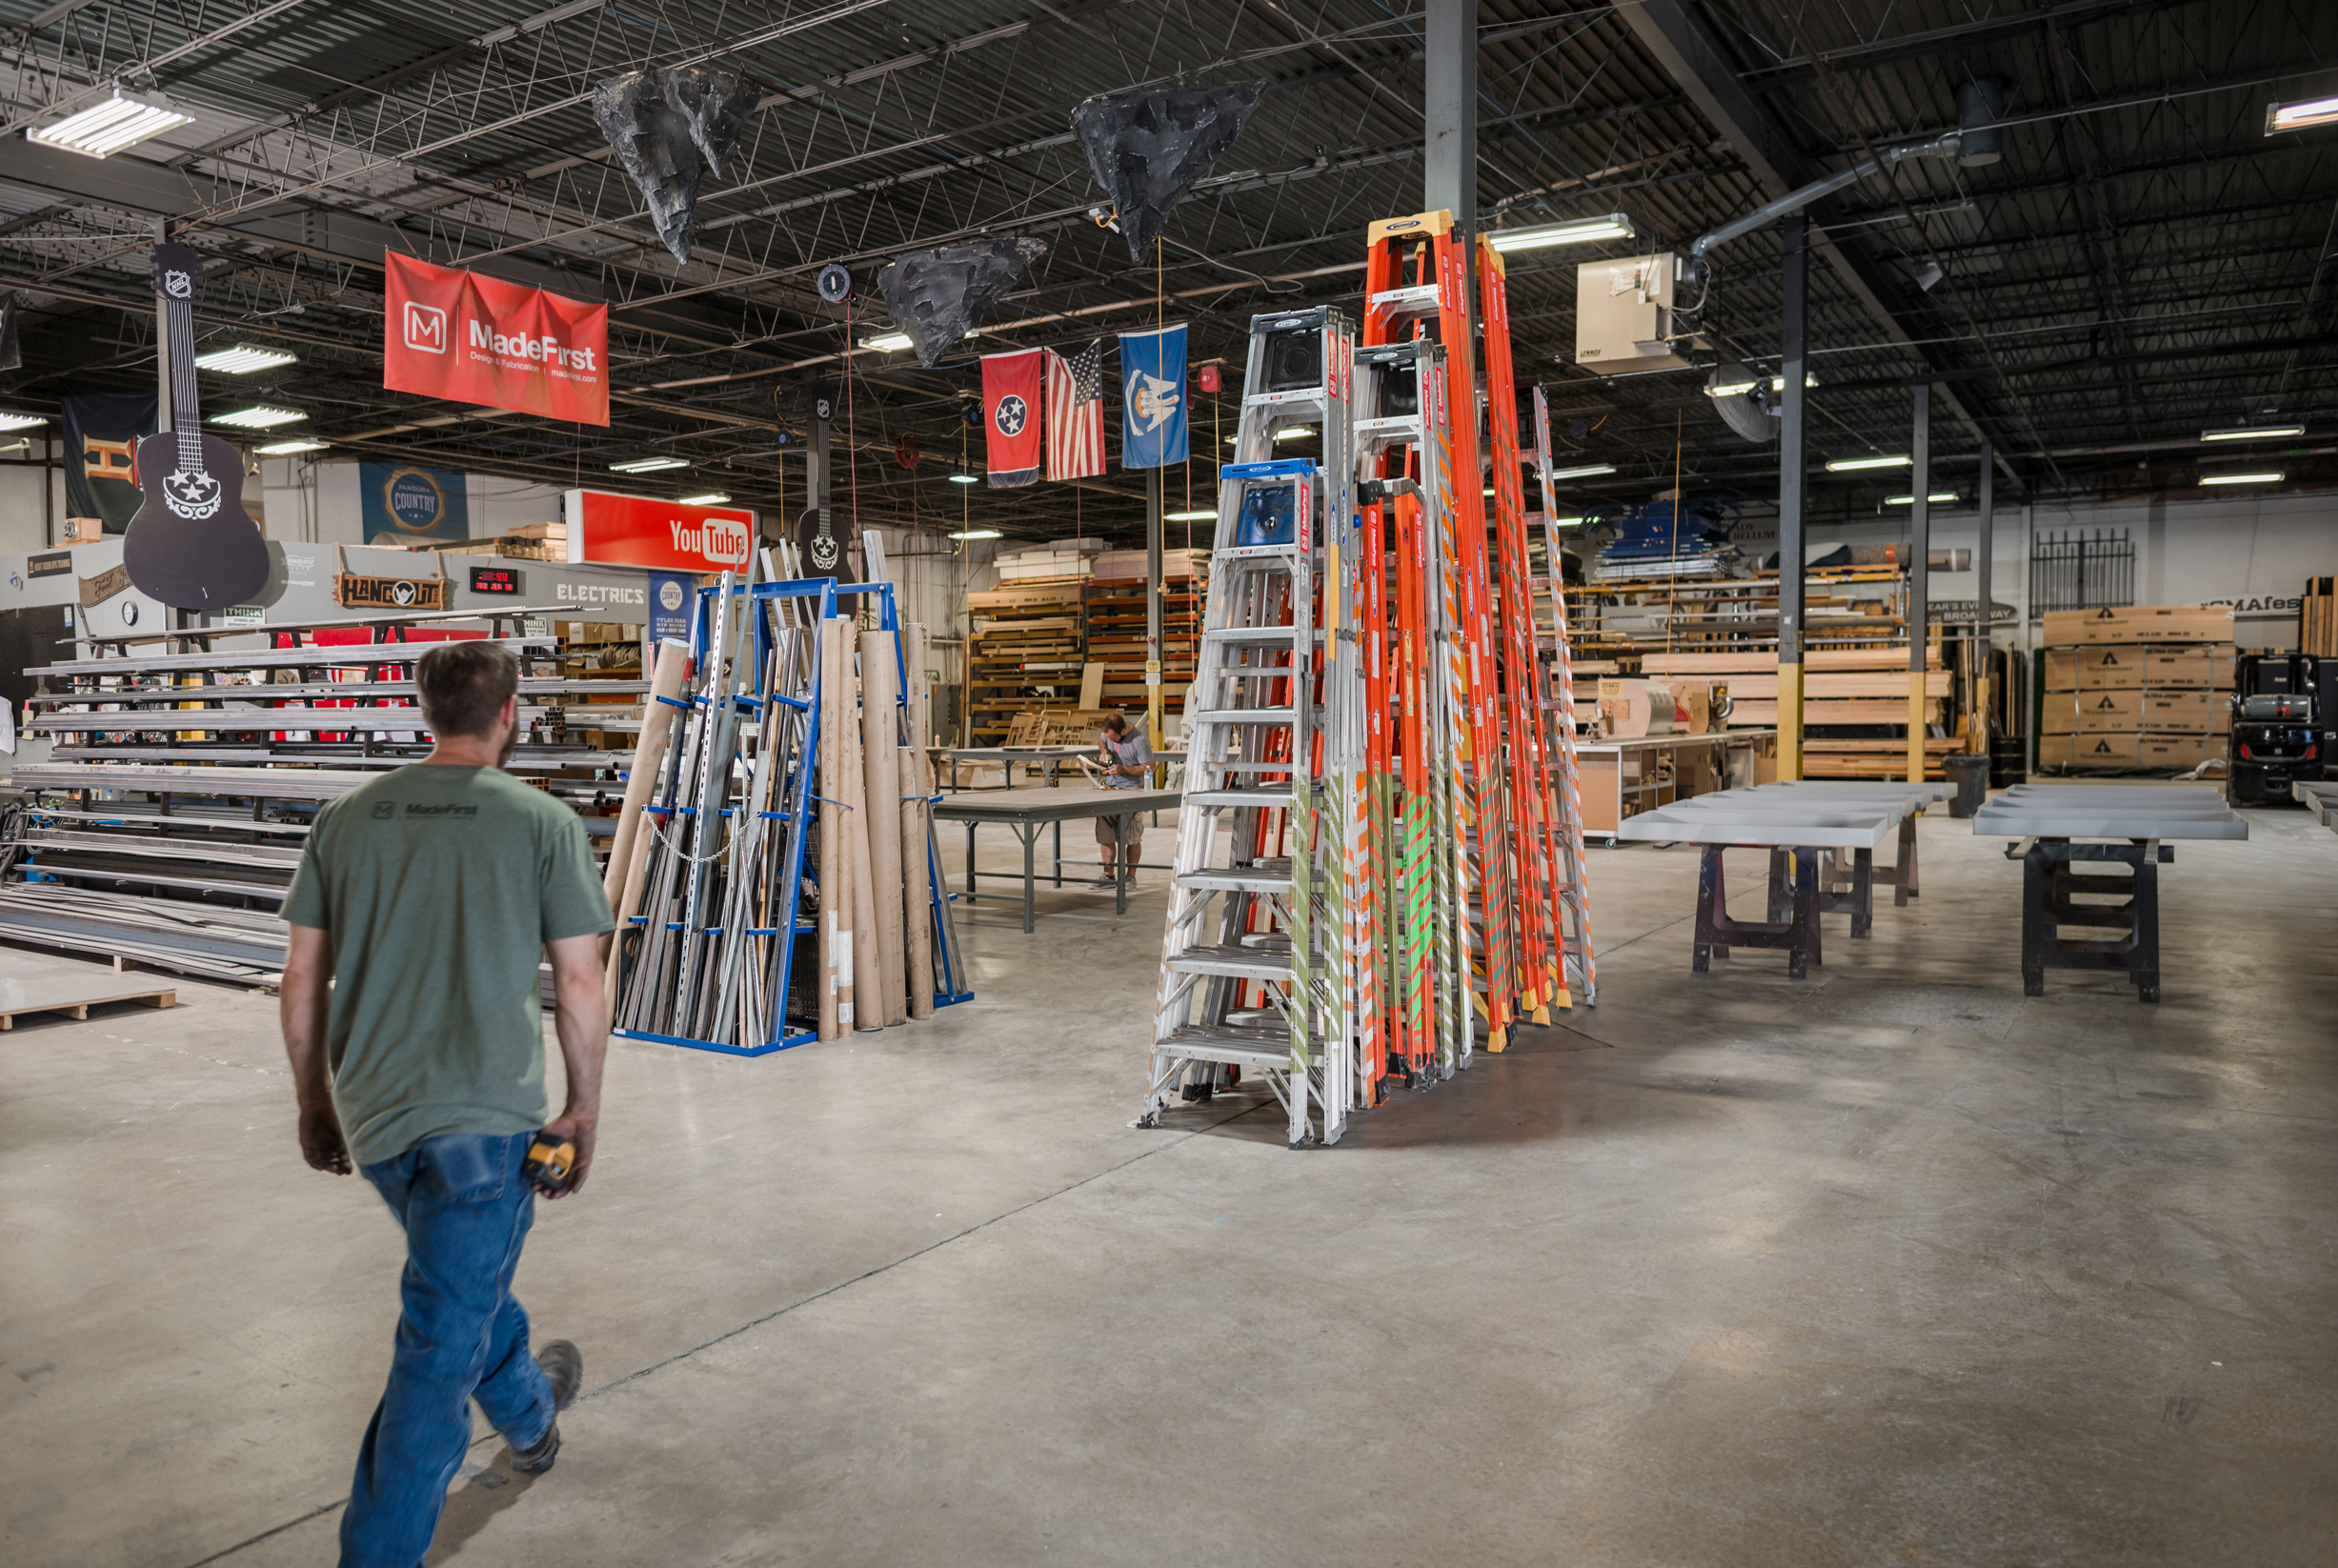 Man at work walking through a warehouse with ladders and construction supplies in Nashville, Tennessee